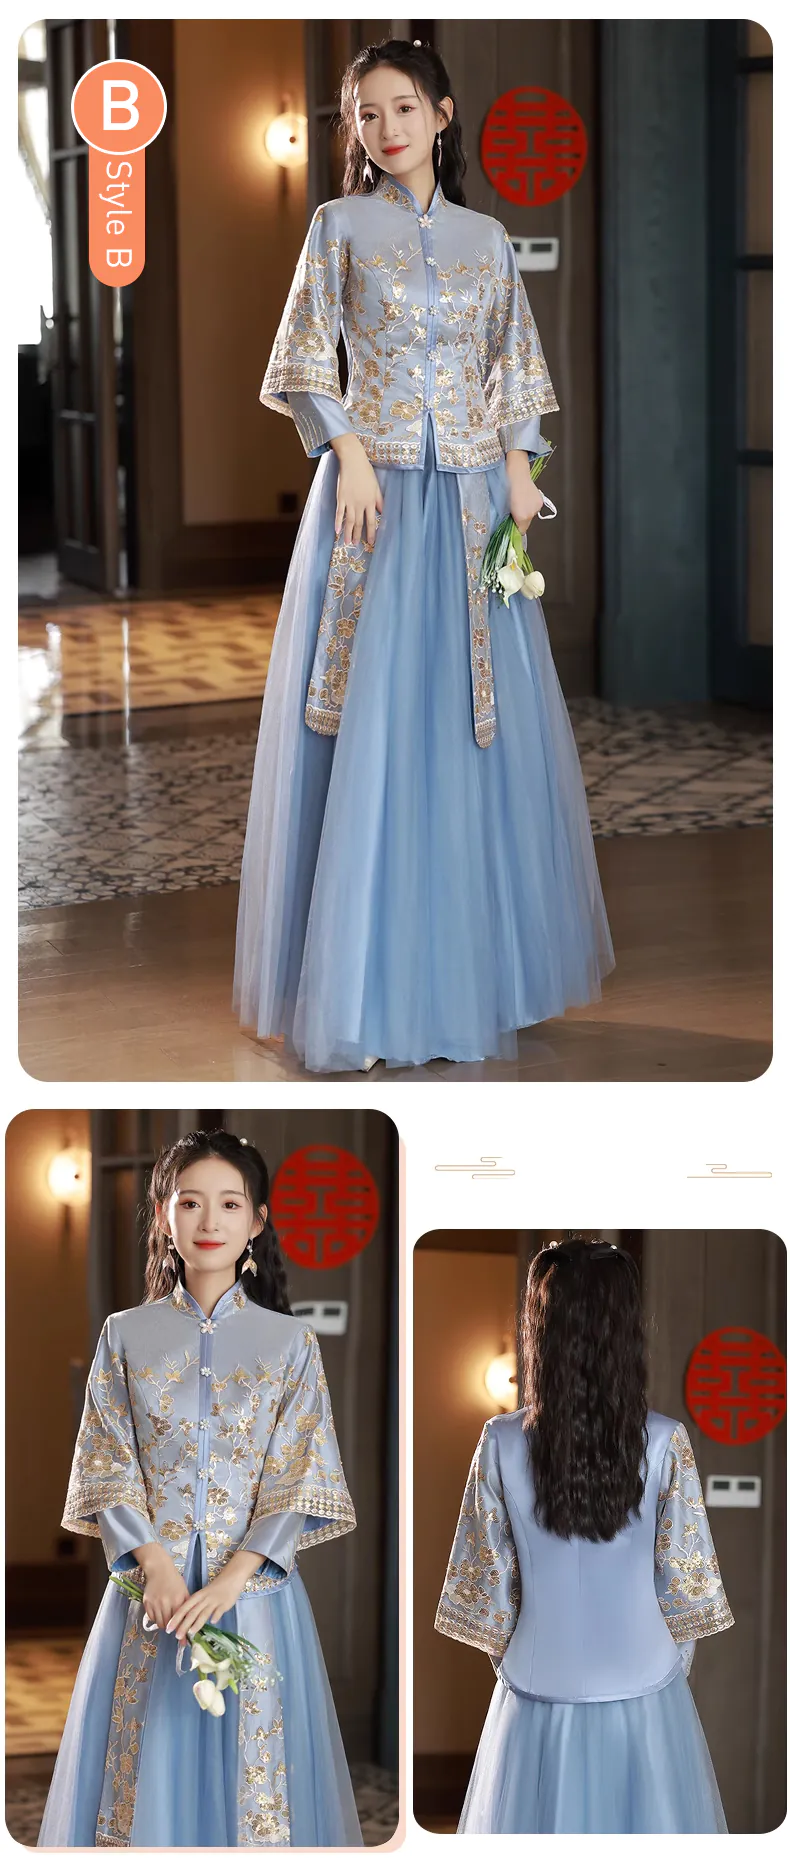 Chinese-Traditional-Style-Blue-Bridal-Wedding-Party-Bridesmaid-Dress16